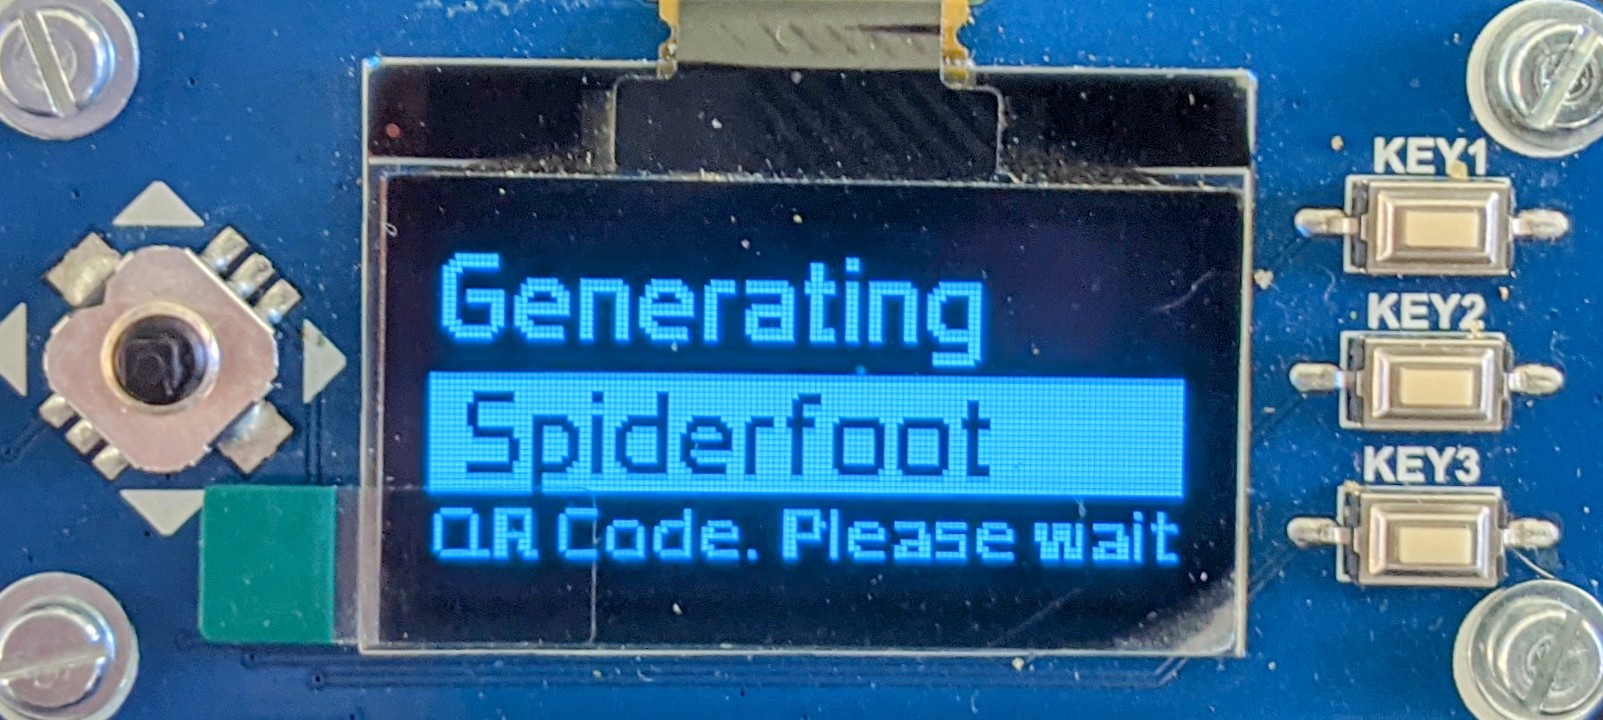 Generating QR Code for Spiderfoot